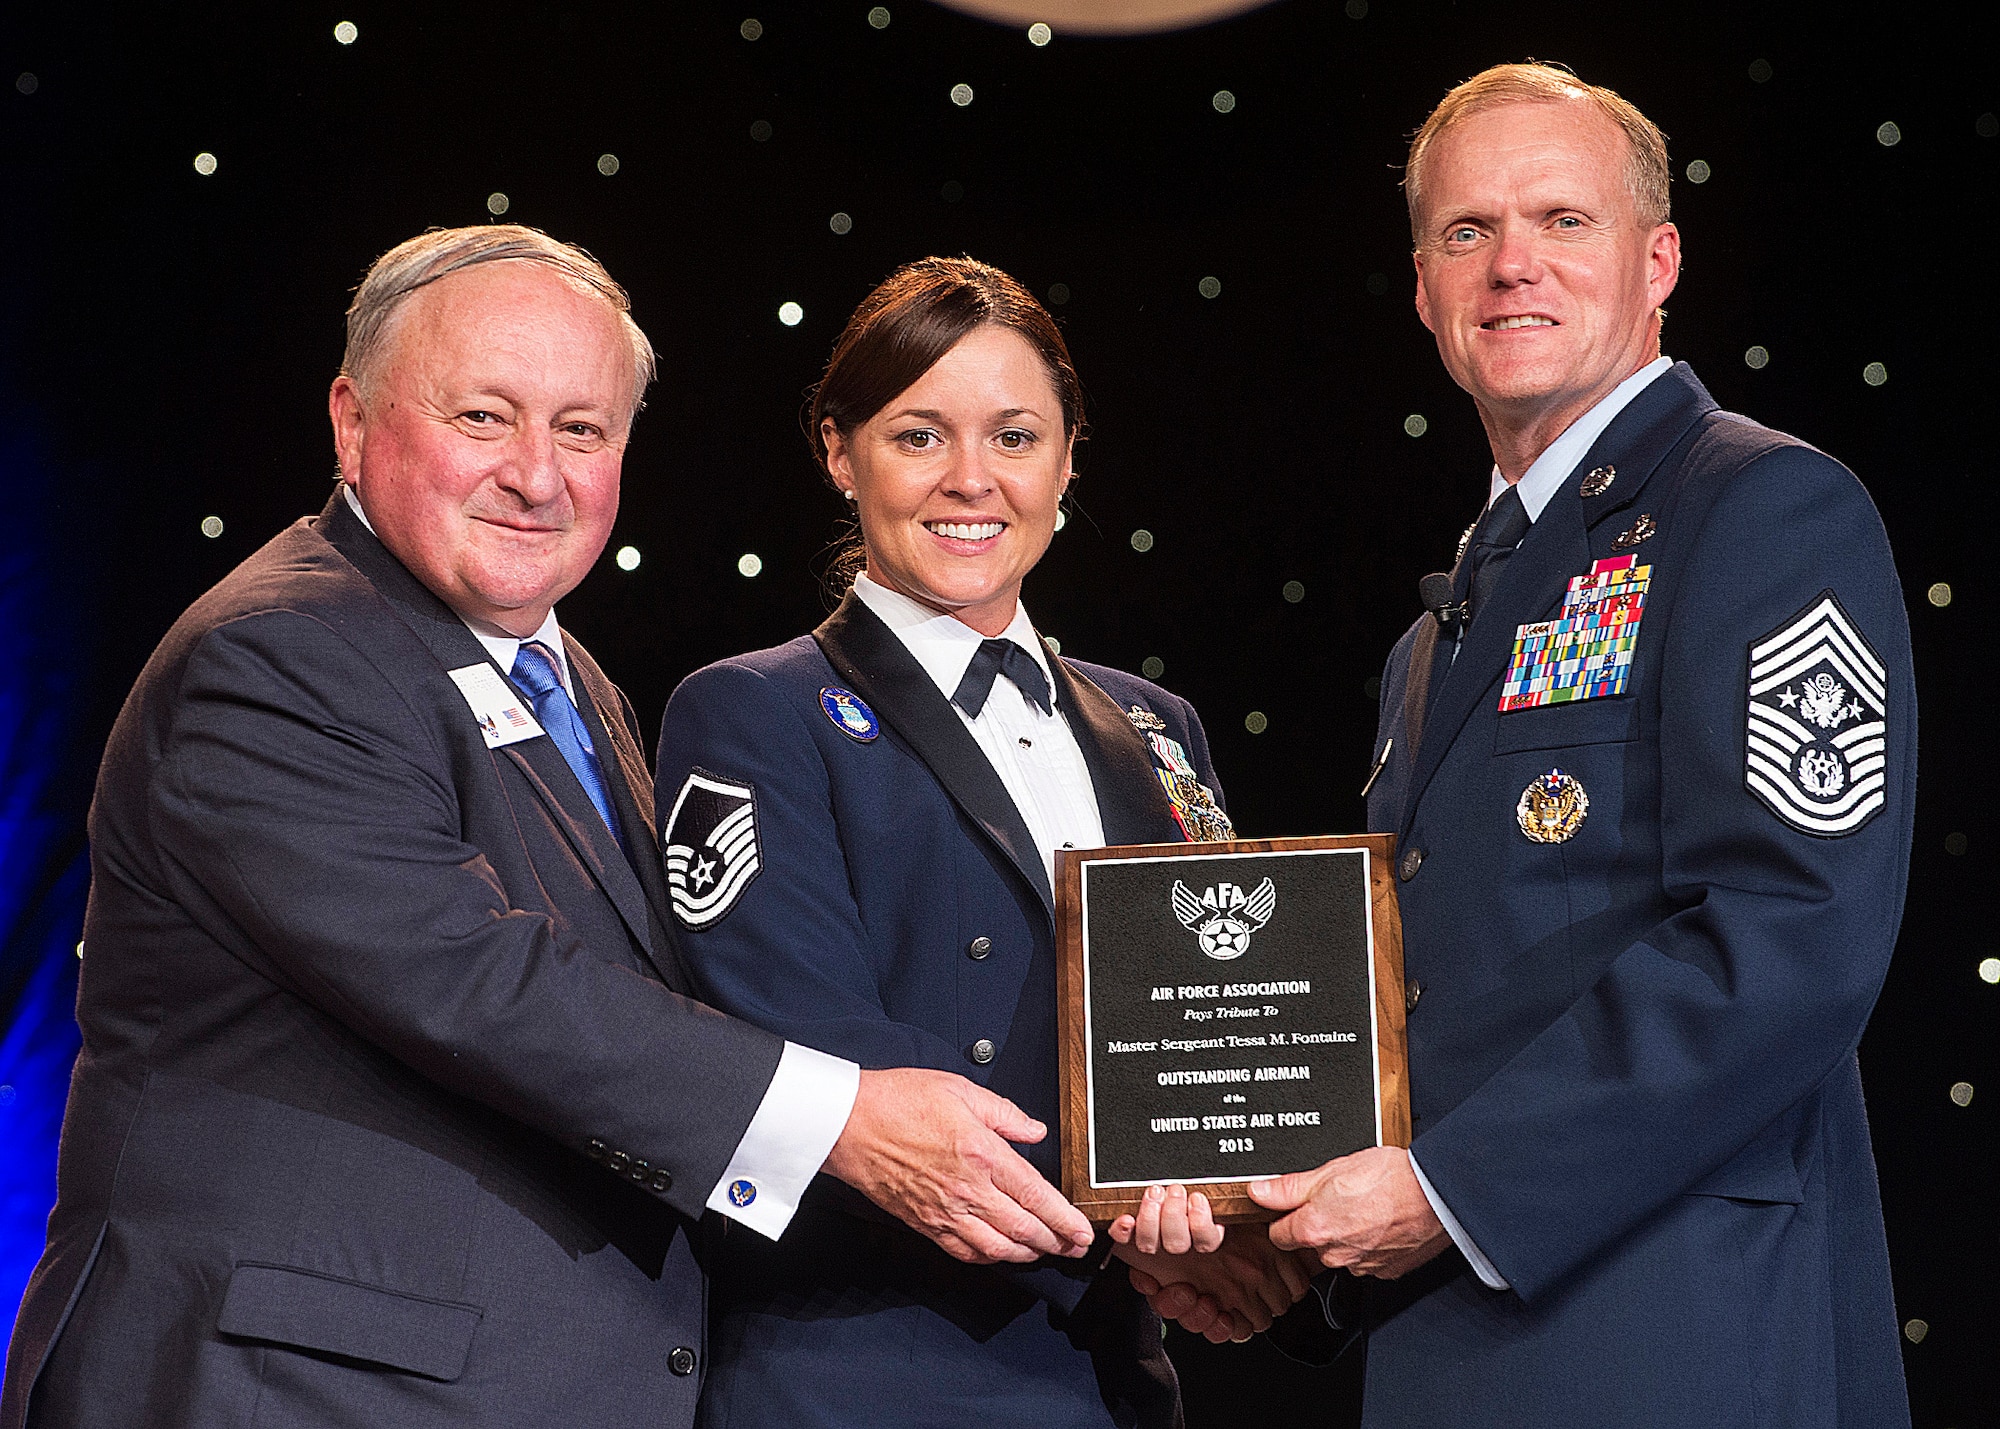 Master Sgt. Tessa Fontaine was recognized as one of the 12 Outstanding Airmen of the Year at a reception and awards dinner hosted by the Air Force Association during the AFA's annual Air & Space Conference and Technology Exposition Sept. 16, 2013, in Washington, D.C. The OAY award recognizes the top 12 outstanding enlisted Airmen for superior leadership, job performance, community involvement and personal achievements. Fontaine is a counterintelligence and cyber counterintelligence superintendent with the National Reconnaissance Office in Chantilly, Va. (U.S. Air Force photo/Jim Varhegyi)